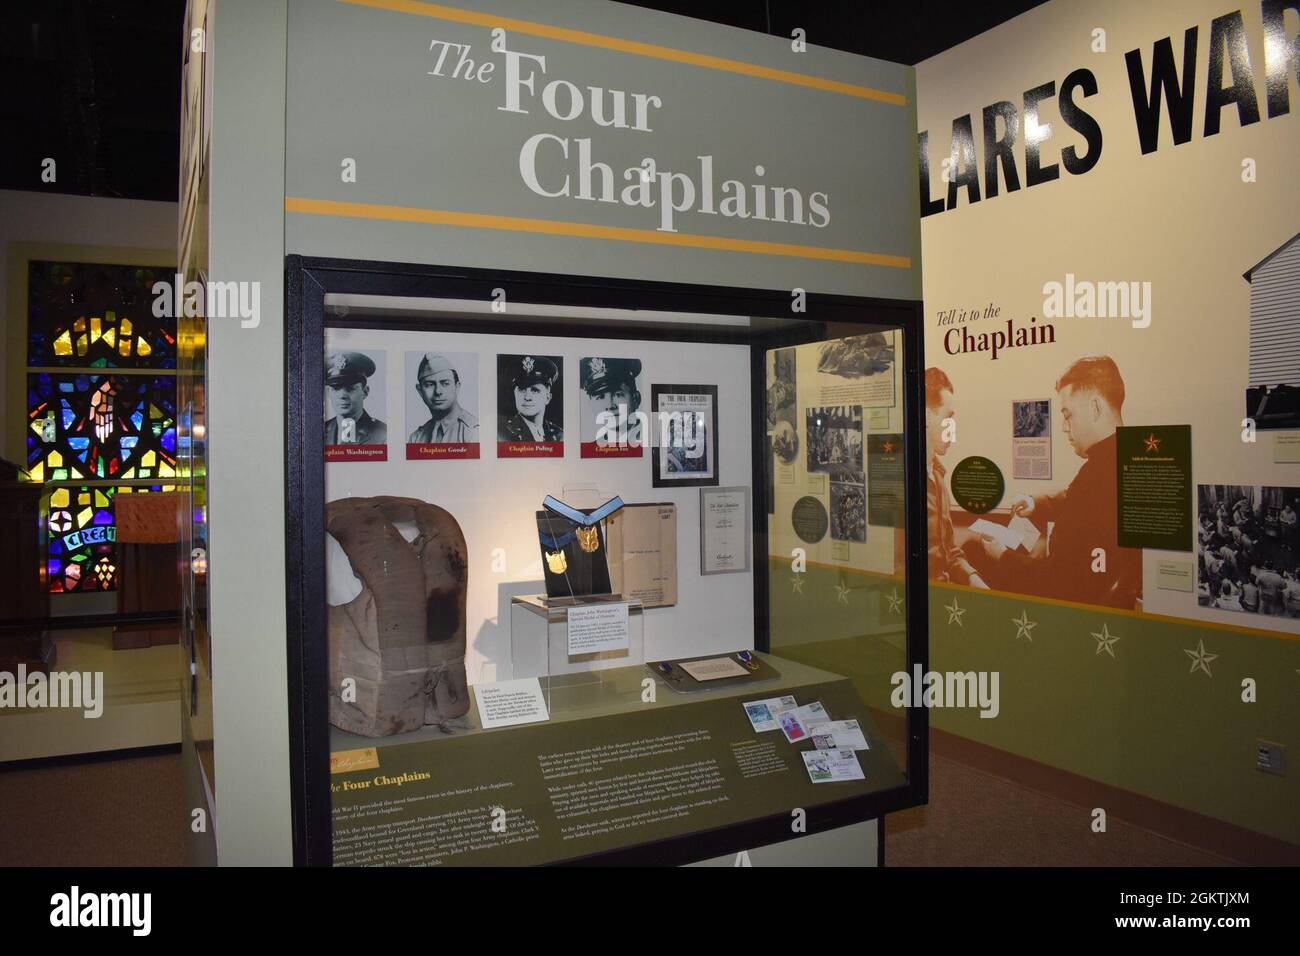 The display for The Four Chaplains at the Army Chaplain Corps Museum on Fort Jackson. The Four Chaplains Medals, or Special Medal of Heroism posthumously awarded in 1961 by Congress to the Four Chaplains who gave up their life jackets and went down with the ship when the SS Dorchester was torpedoed by a German U-boat February 3, 1943. Stock Photo